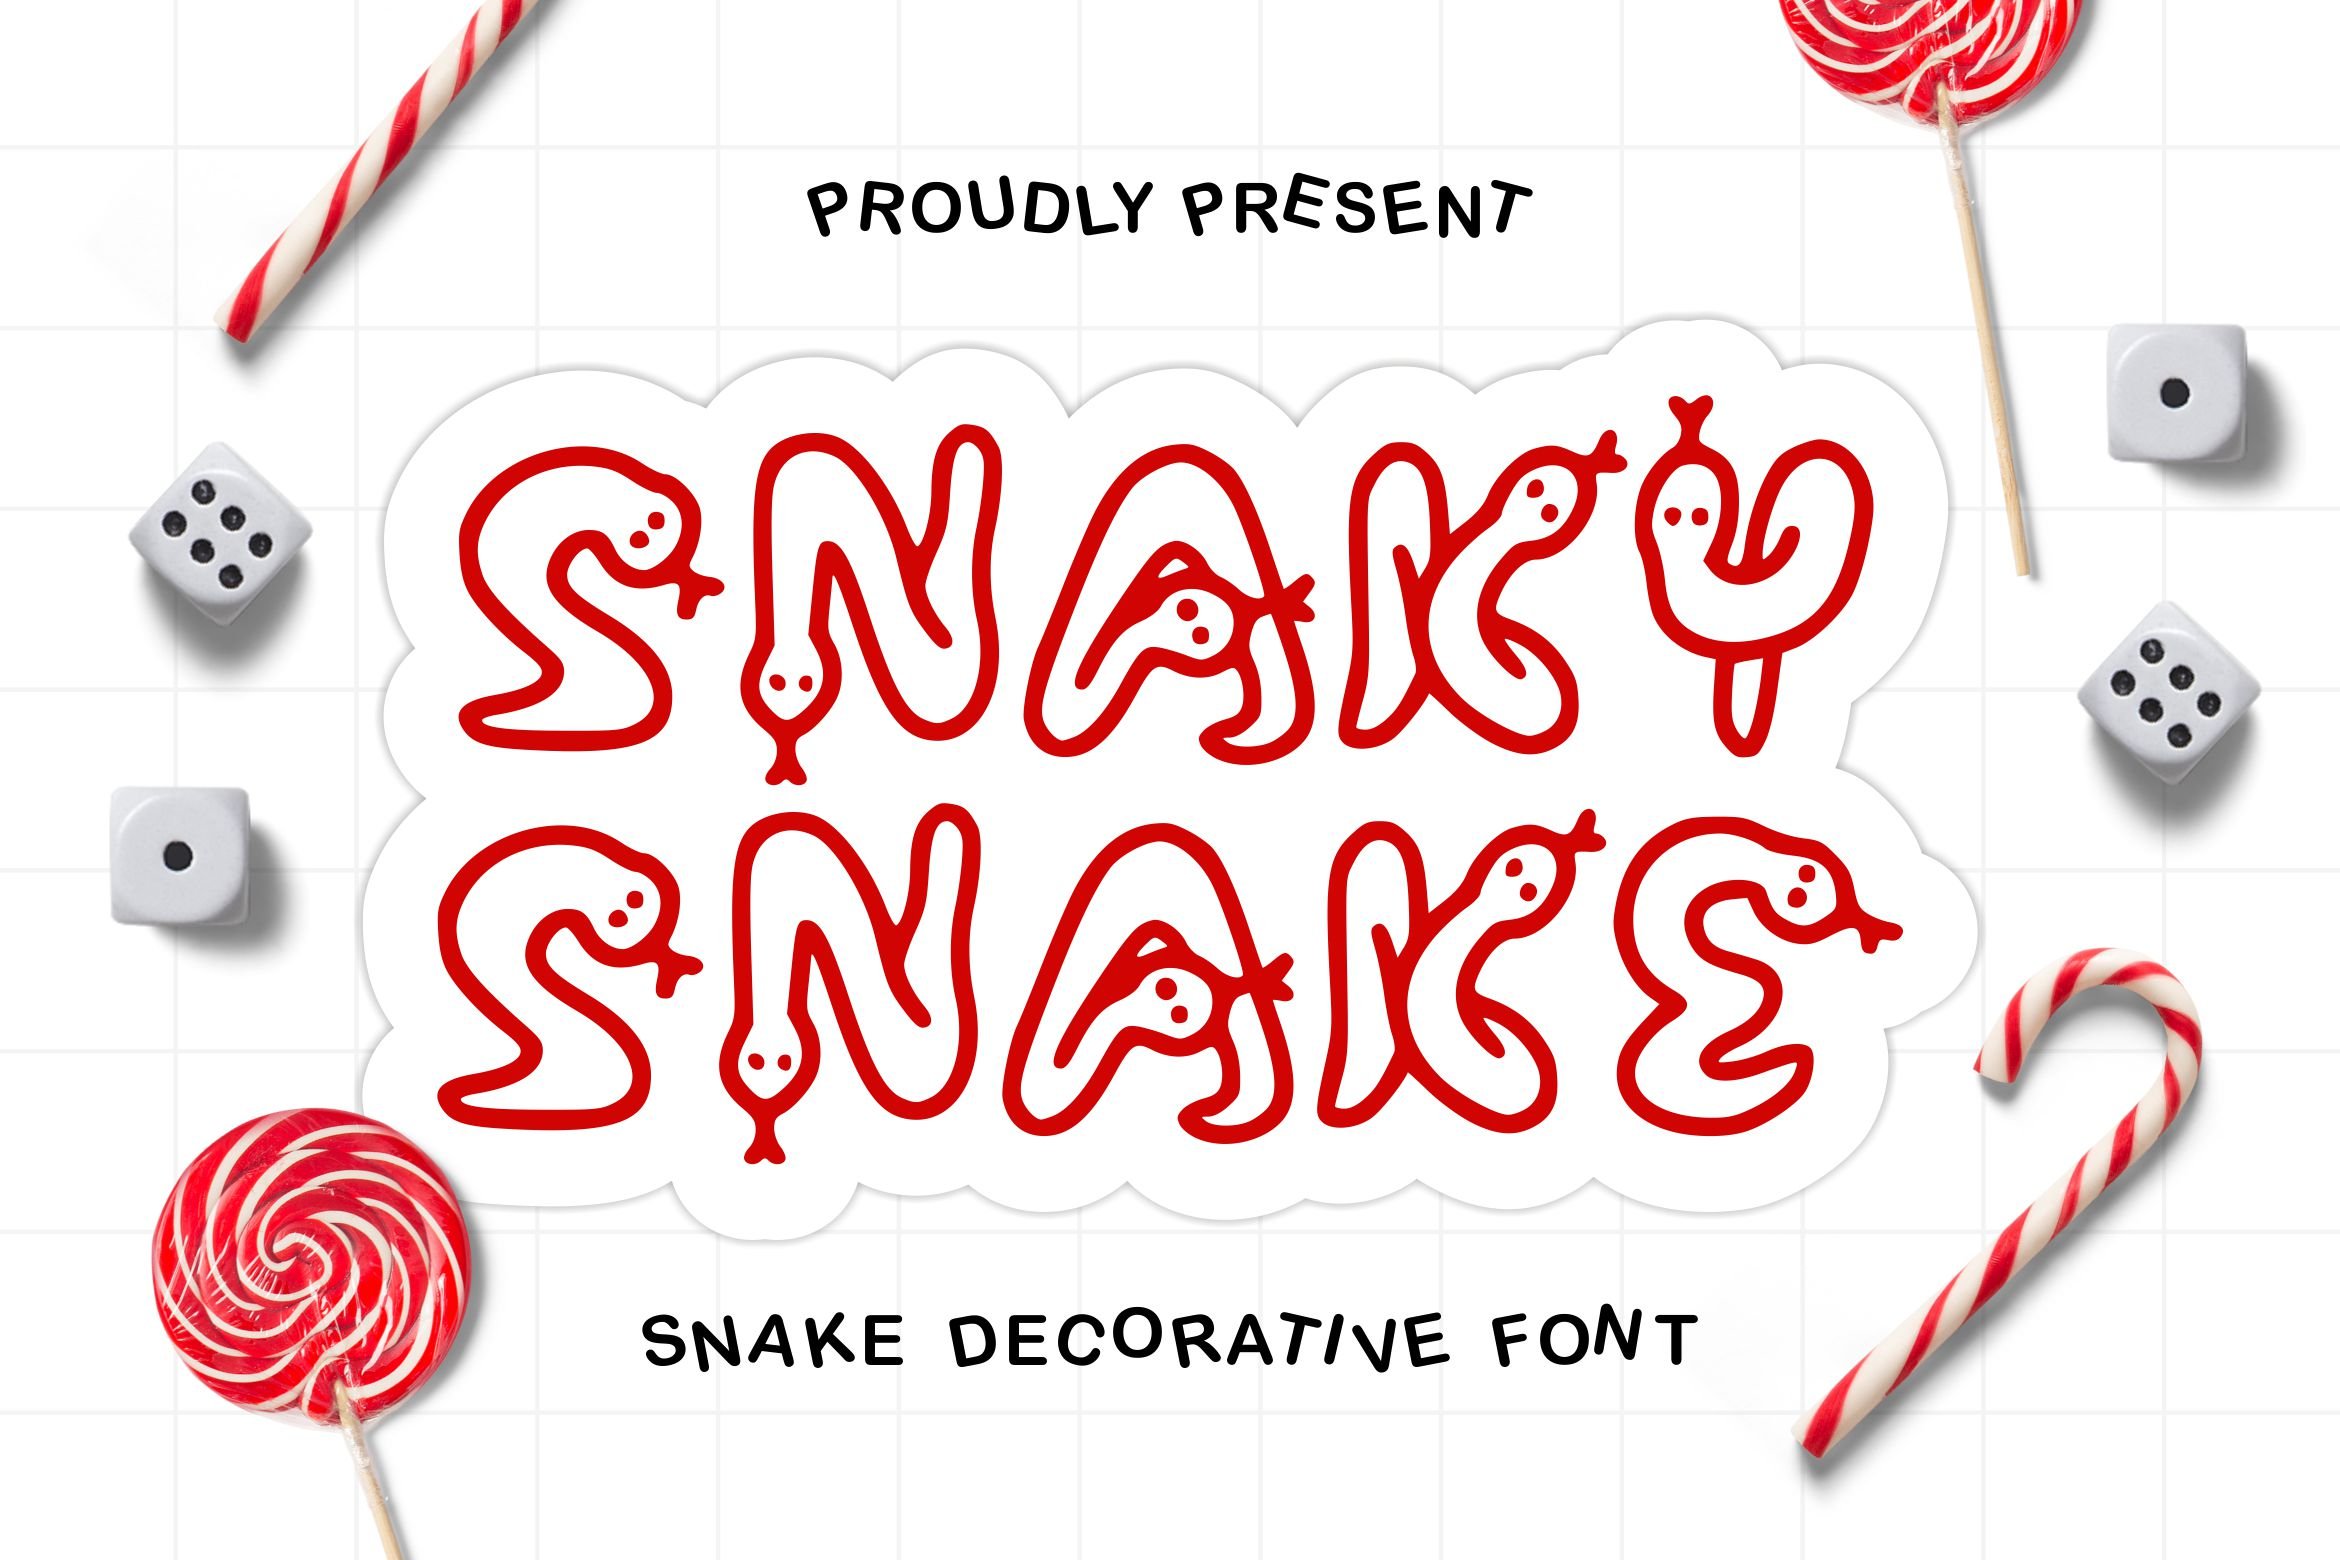 Snaky Snake cover image.